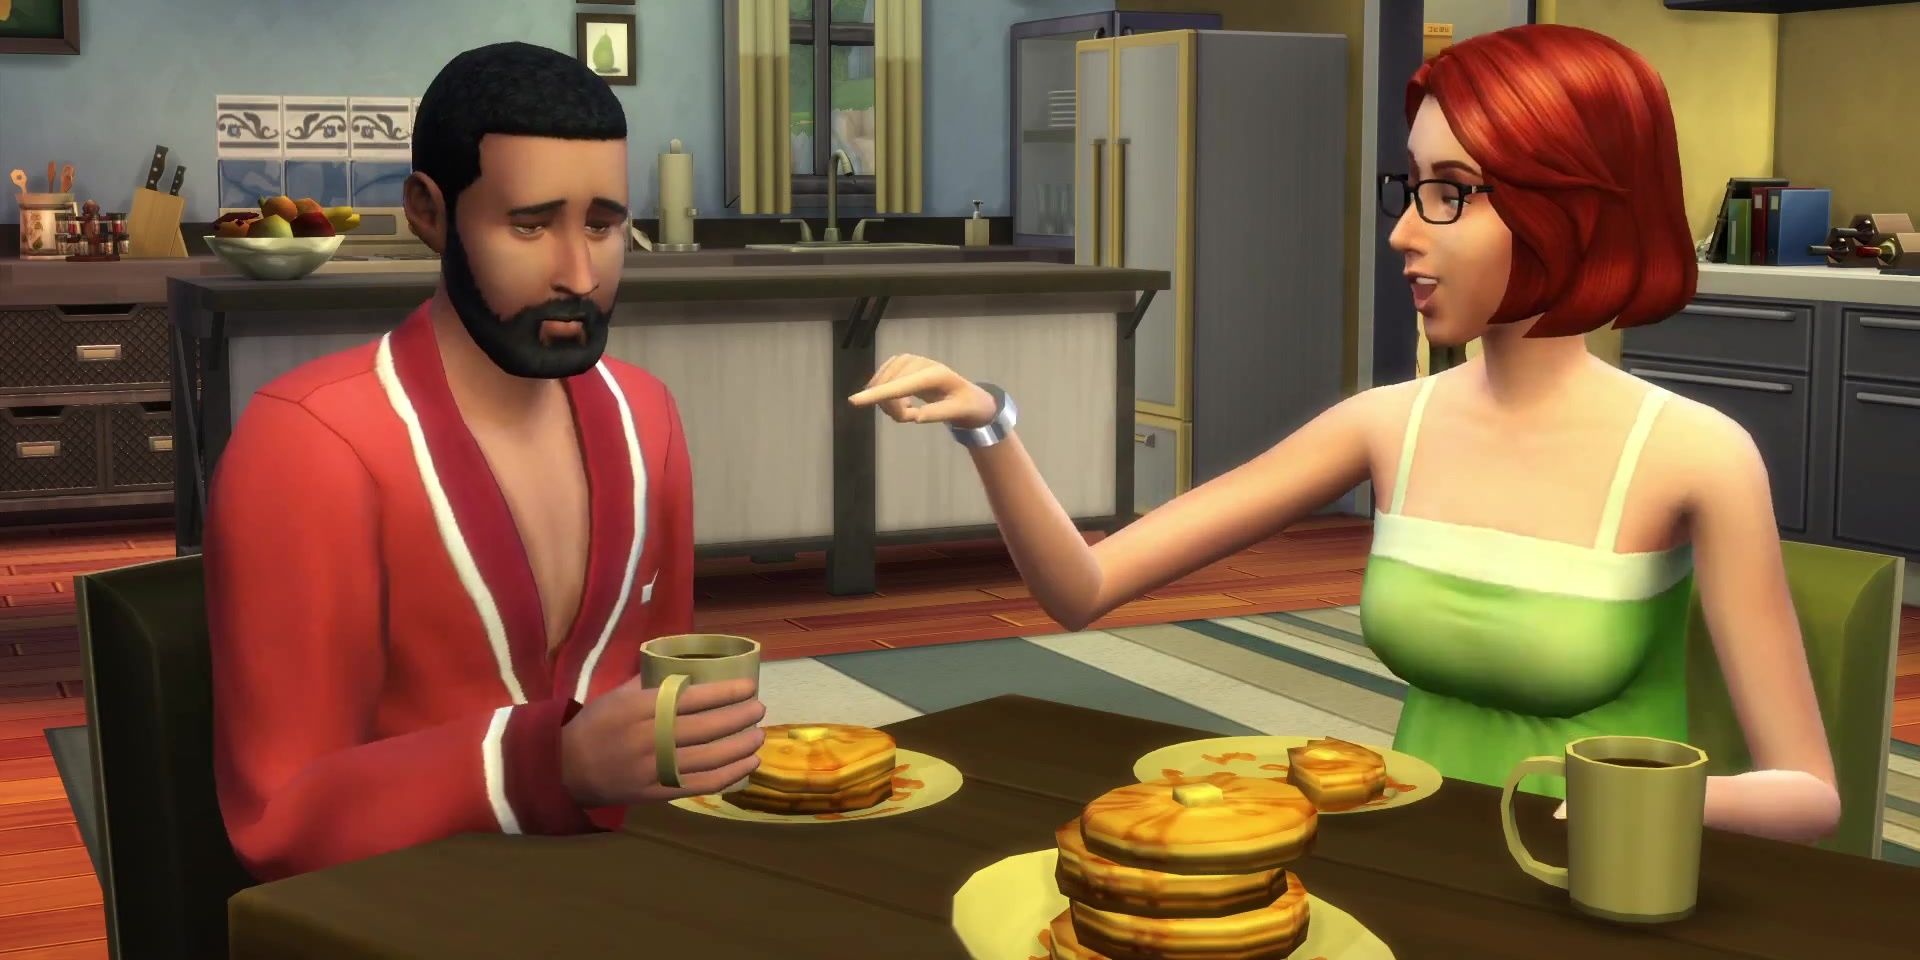 Sims Eating Breakfast From The Sims 4